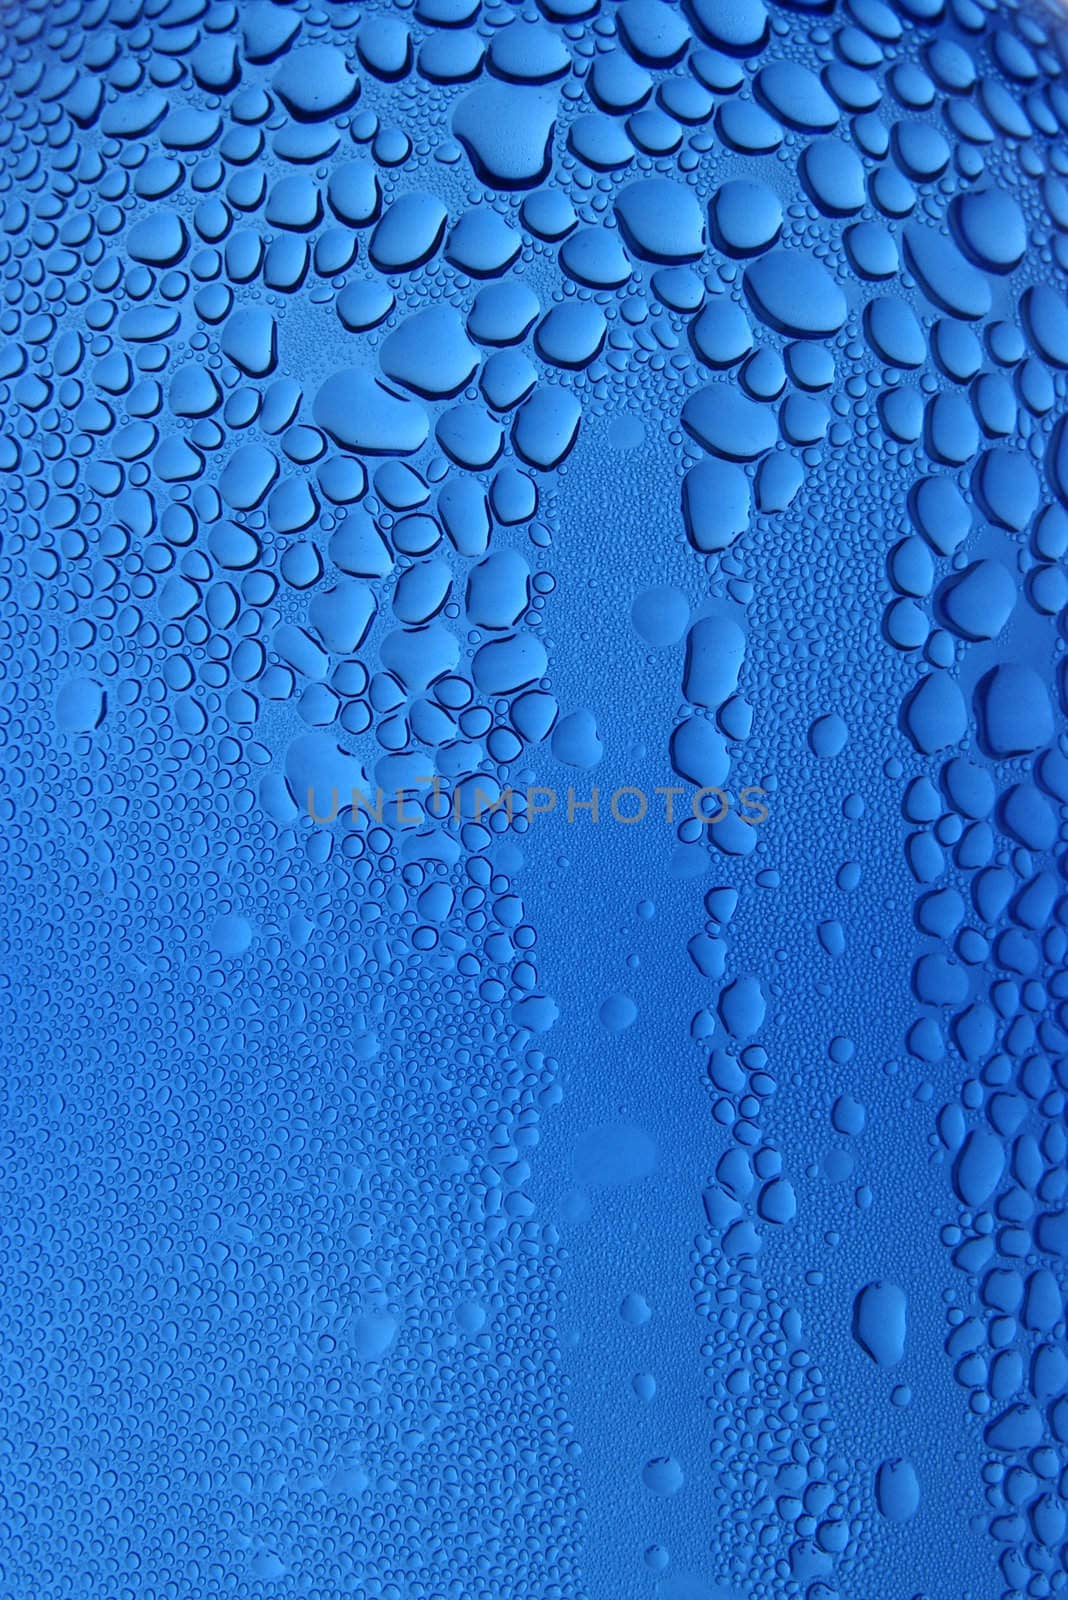 Drops of water clinging to a transparent blue surface